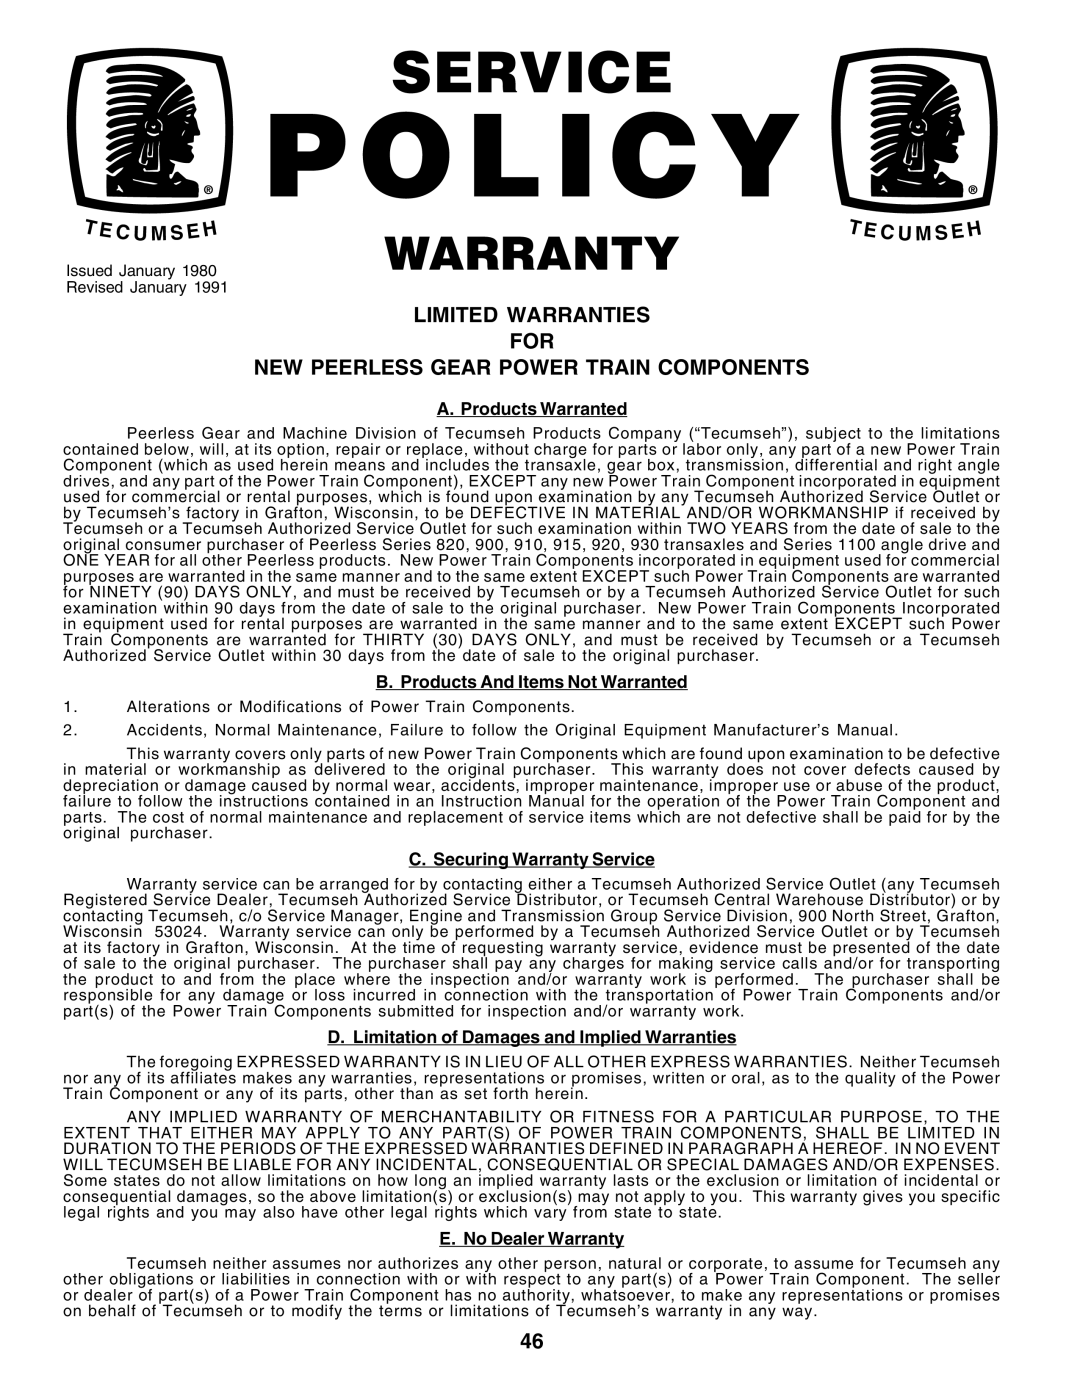 Poulan 183313 Limited Warranties For New Peerless Gear Power Train Components, T E C U M Seh, Policy, Service, Warranty 